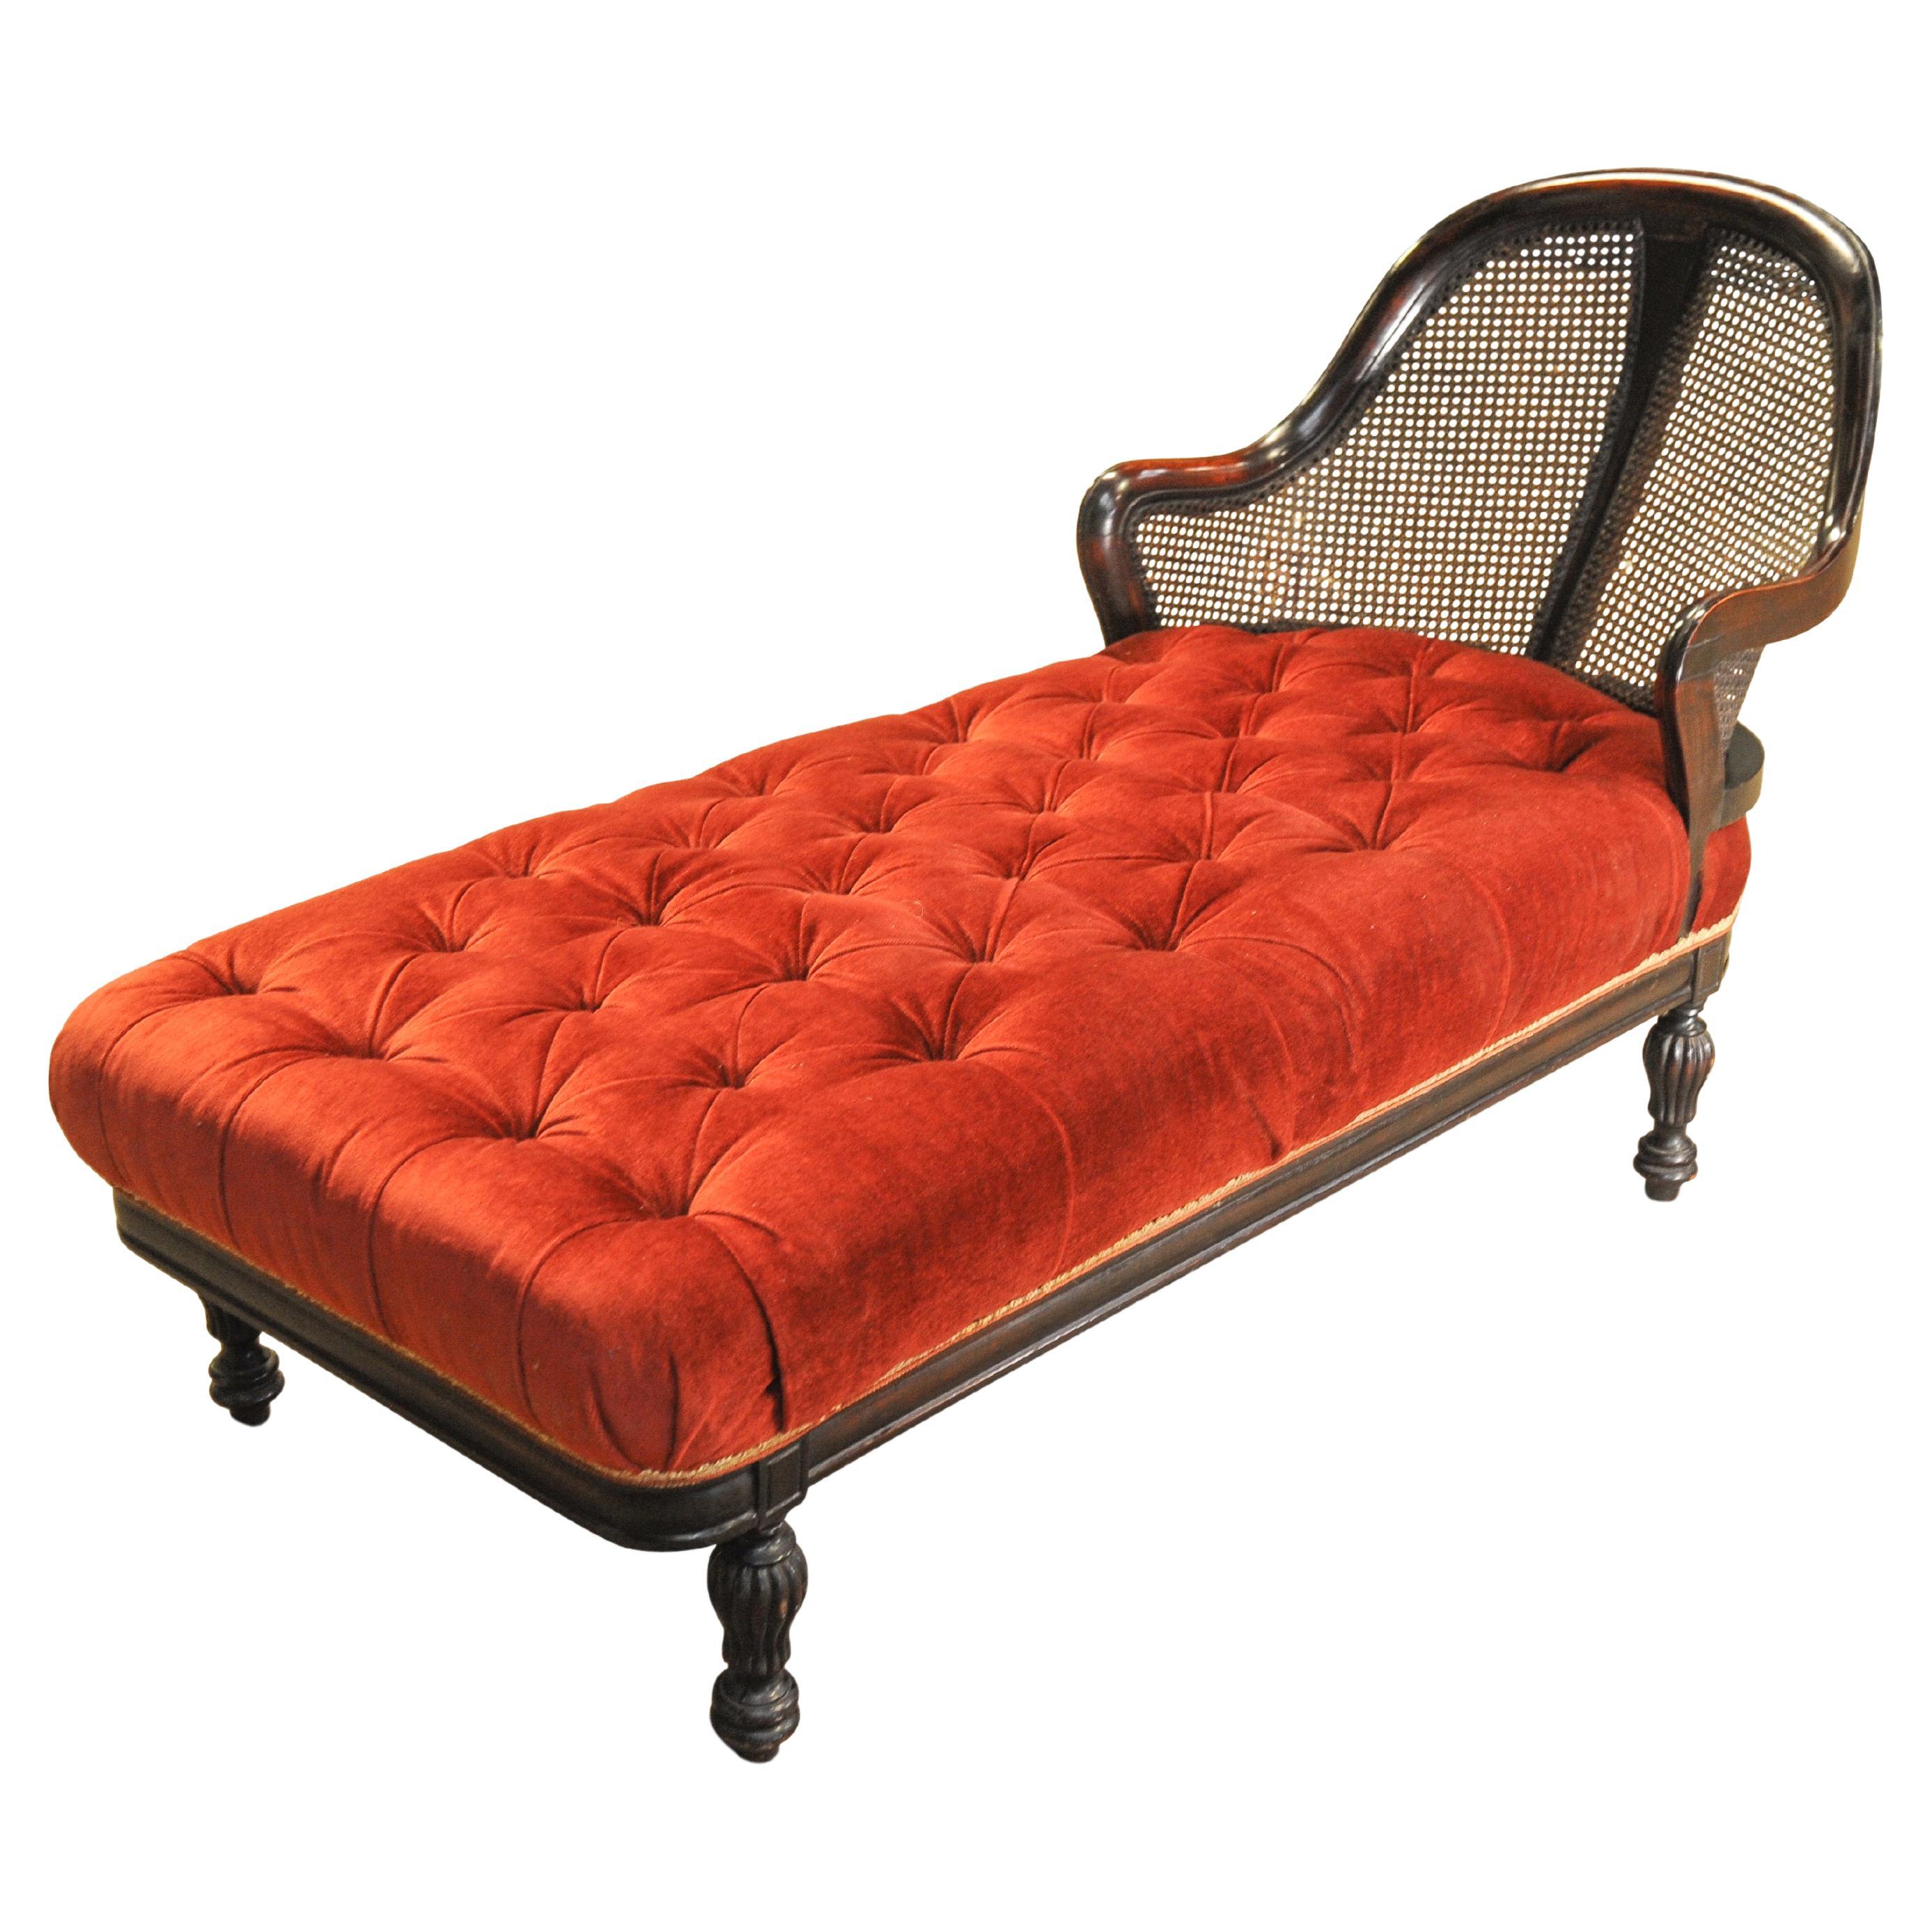 Rare Victorian Red Velvet Chesterfield Bergere Chaise Longue / Day Bed 